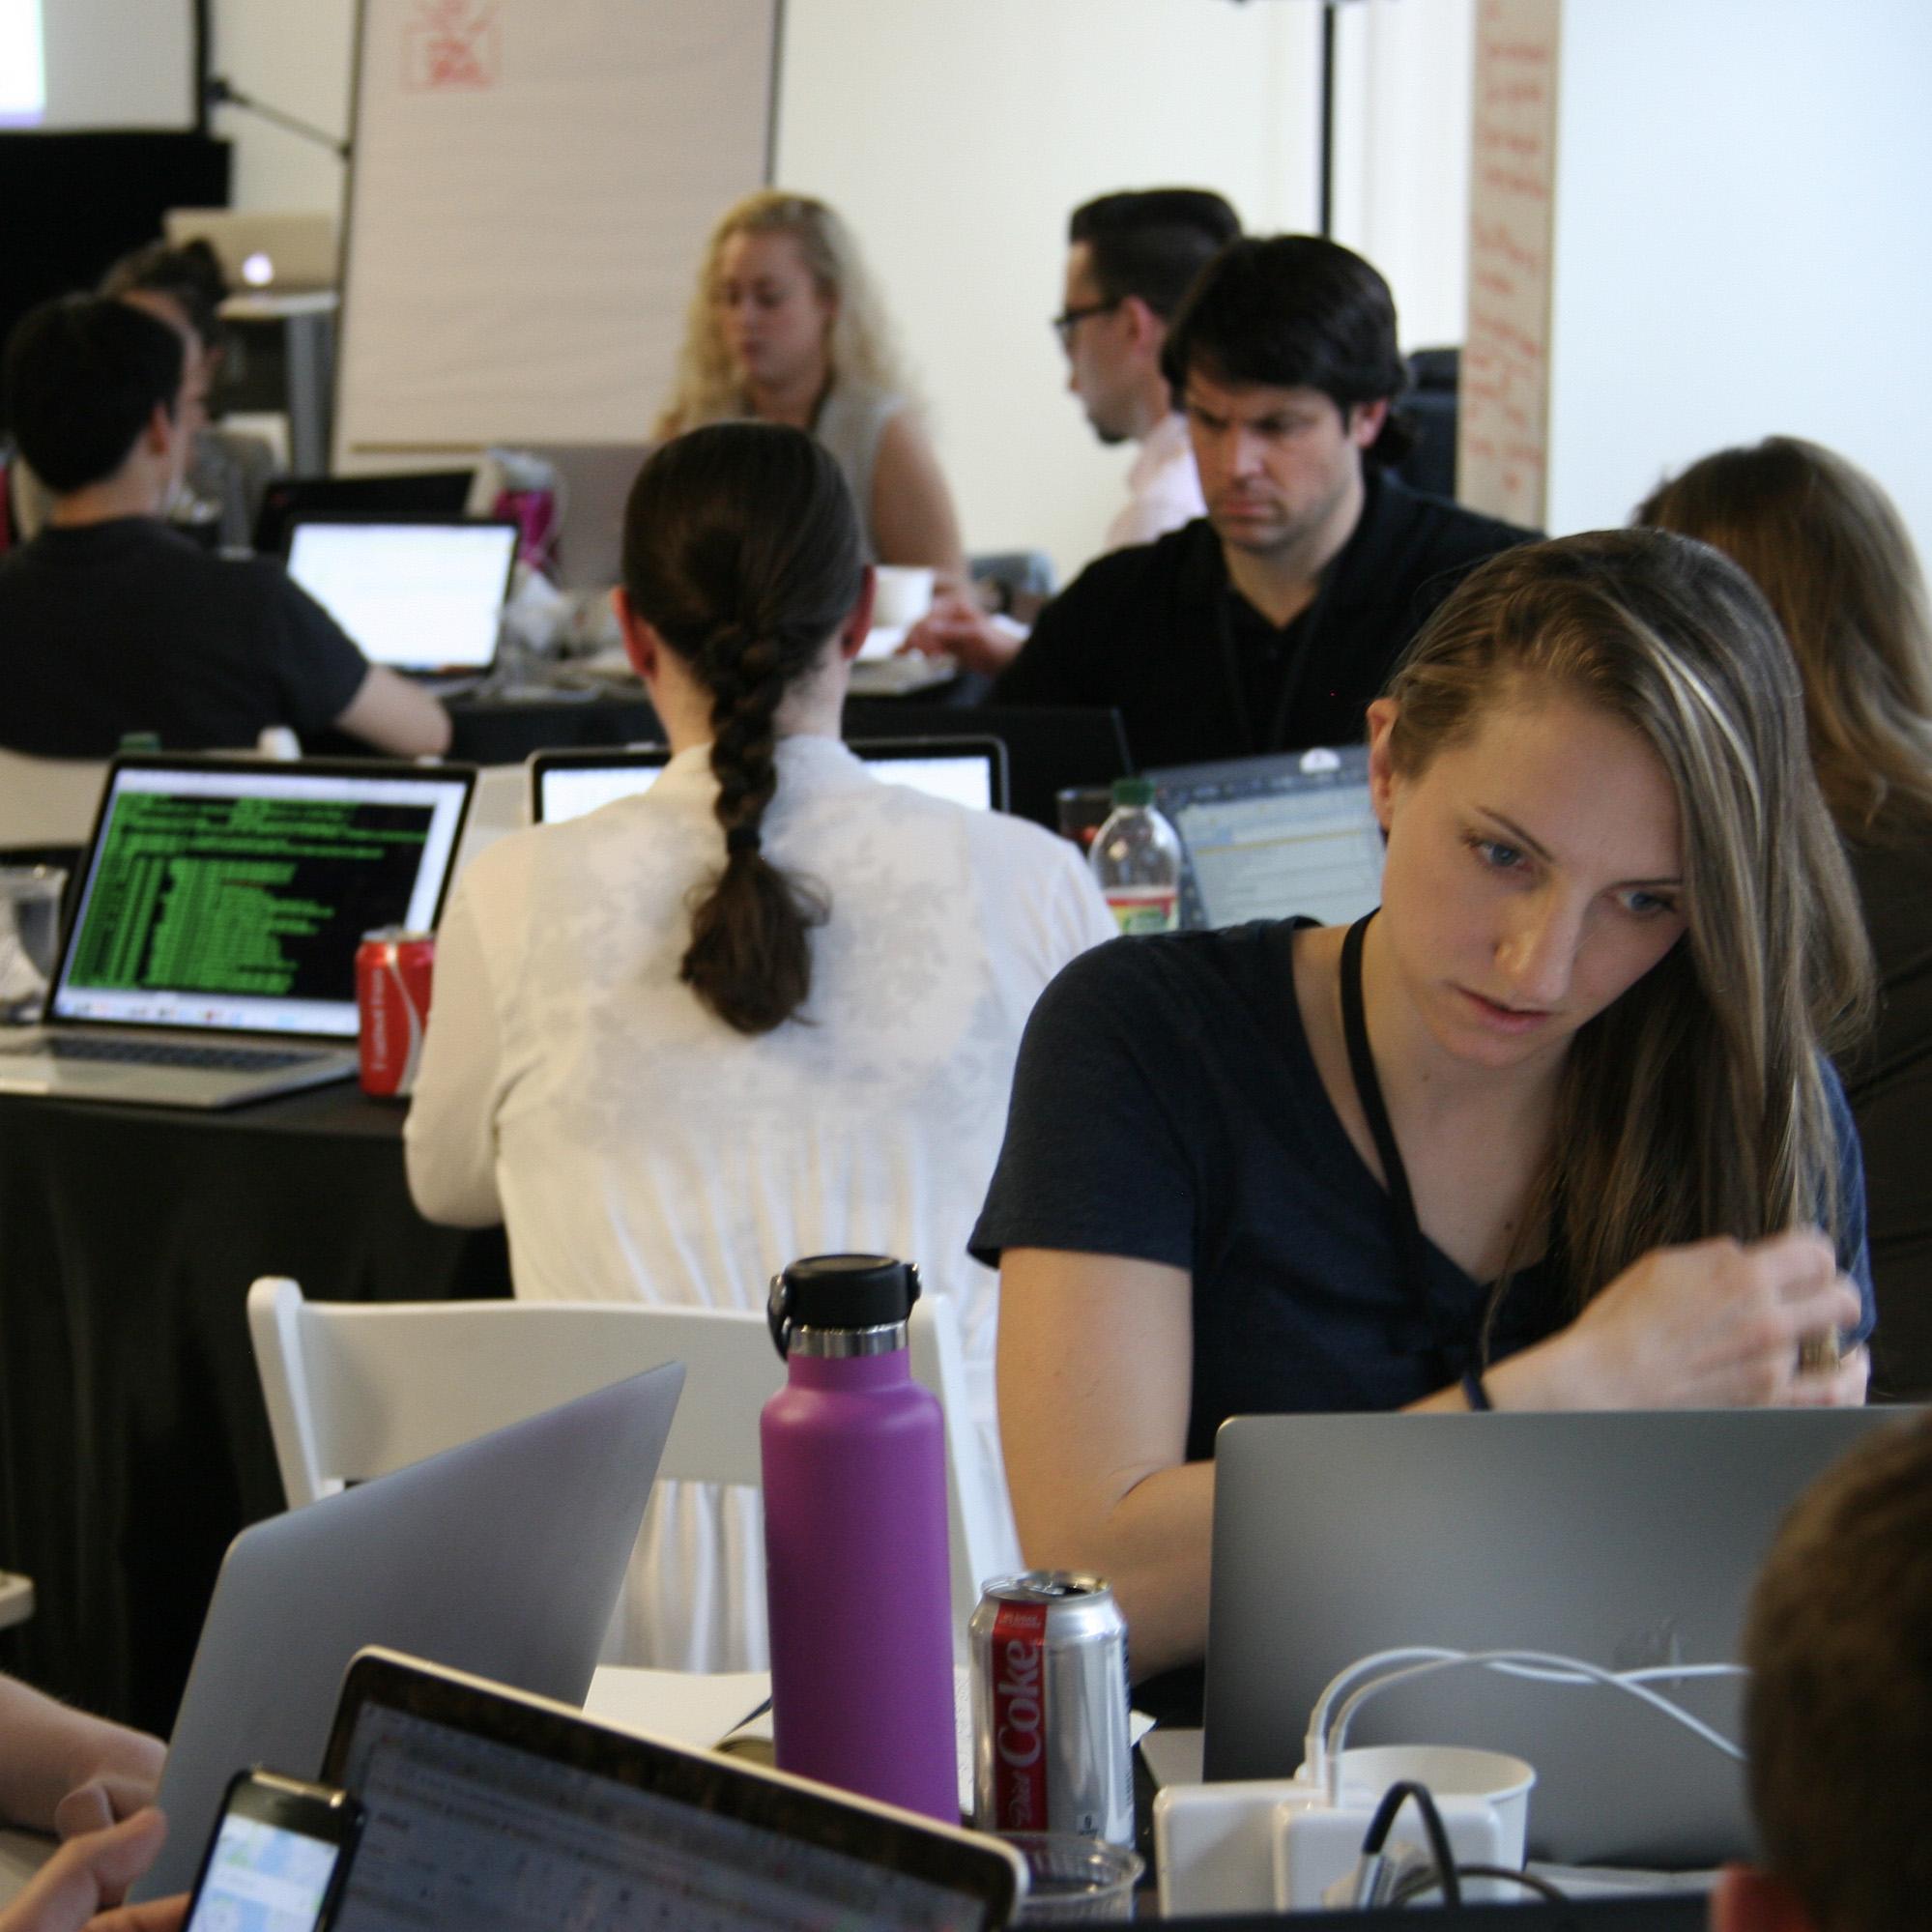 Participants in a hackathon sit at tables working on their laptops